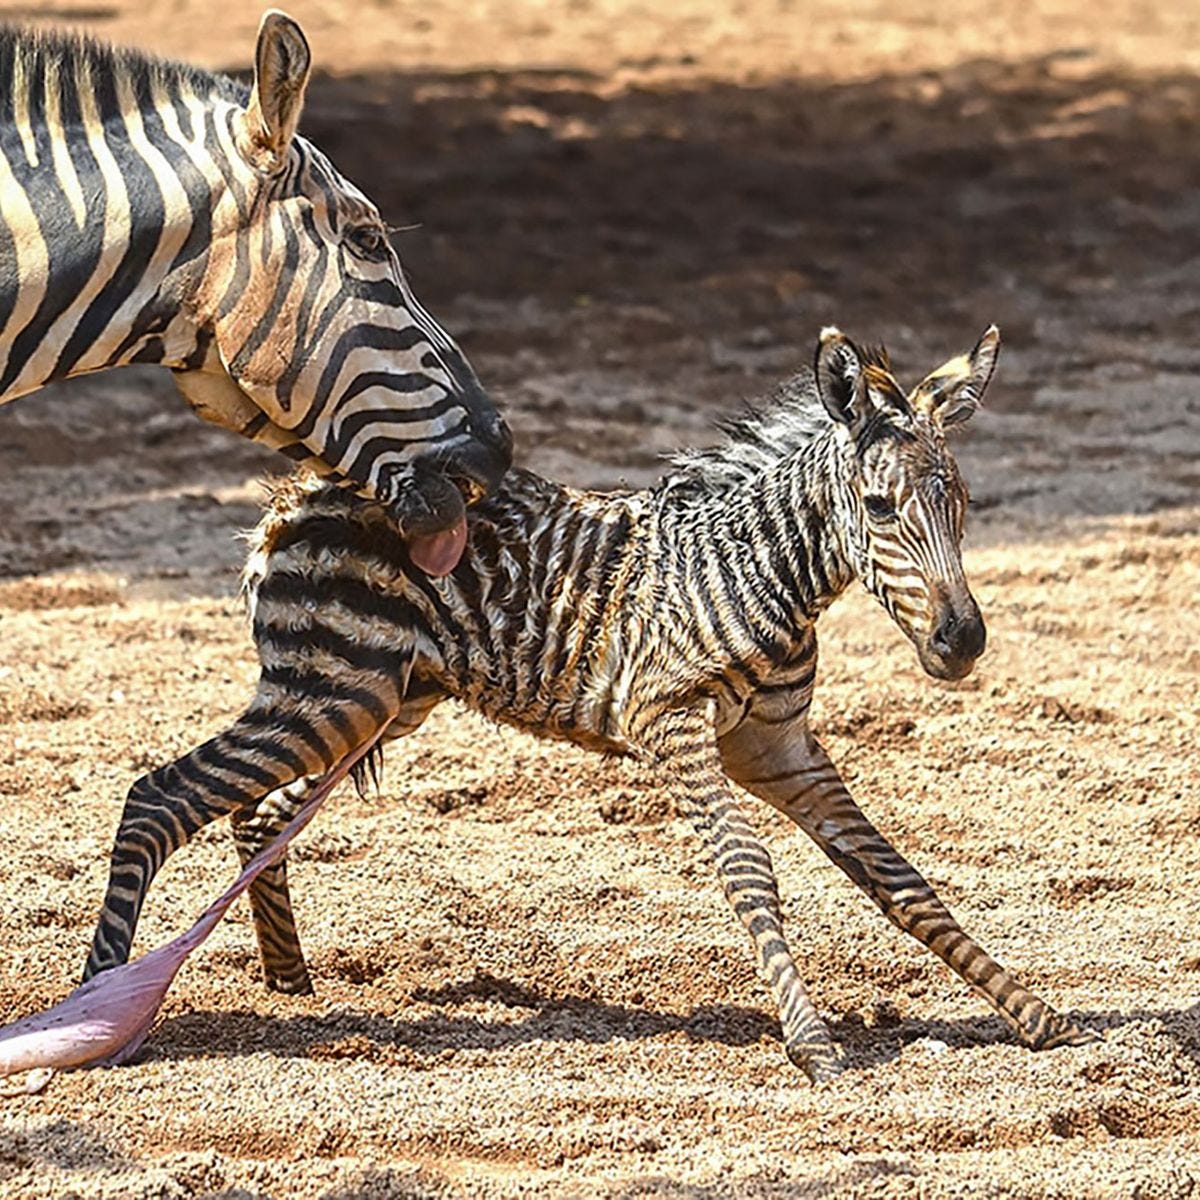 Newborn zebra's life saved by zookeepers as it starts to drown seconds  after birth - World News - Mirror Online